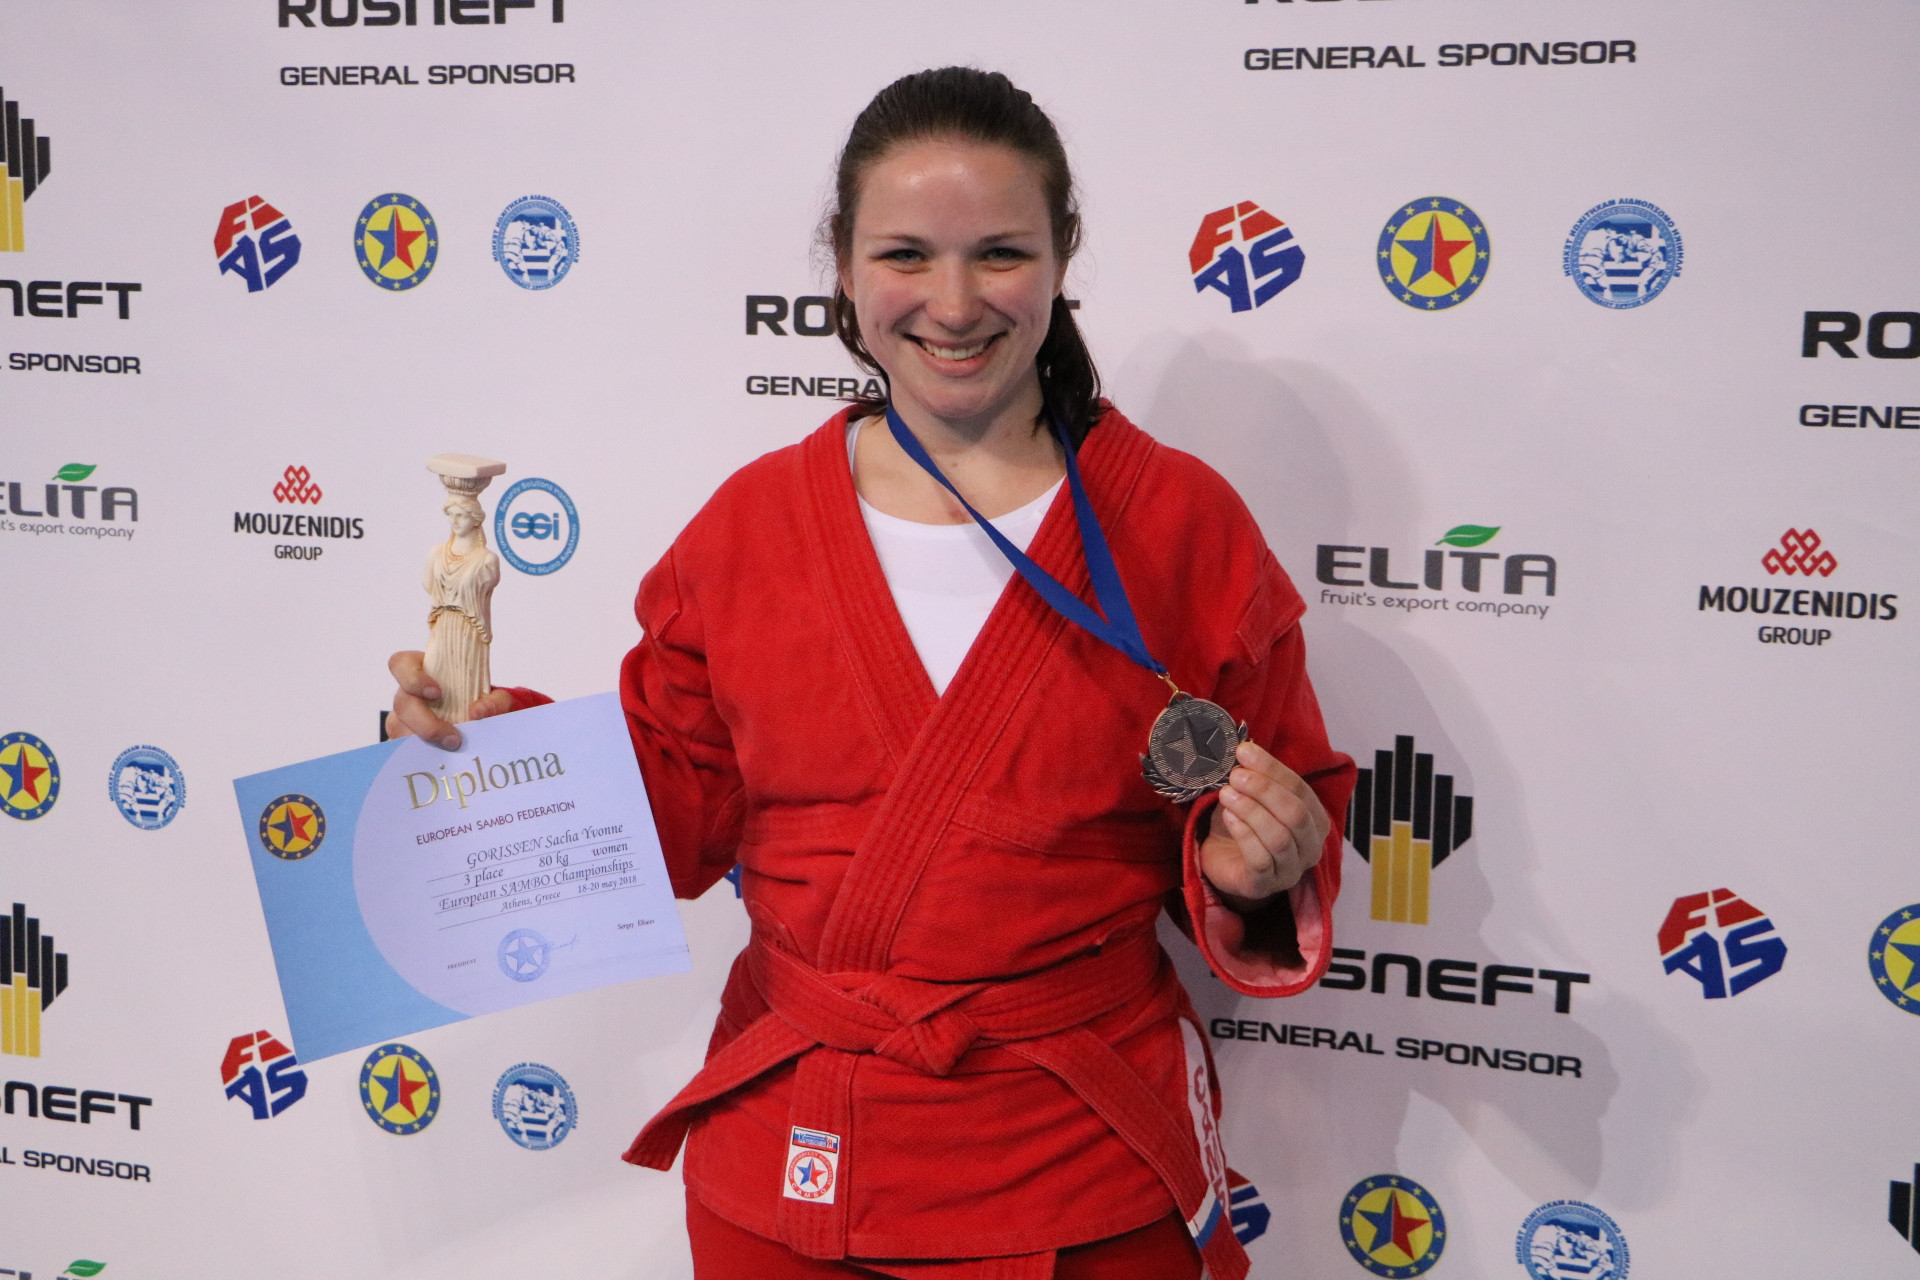 The Netherlands' Sacha Yvonne Gorissen was another medallist from Western Europe, taking bronze in the women's 80kg division ©FIAS